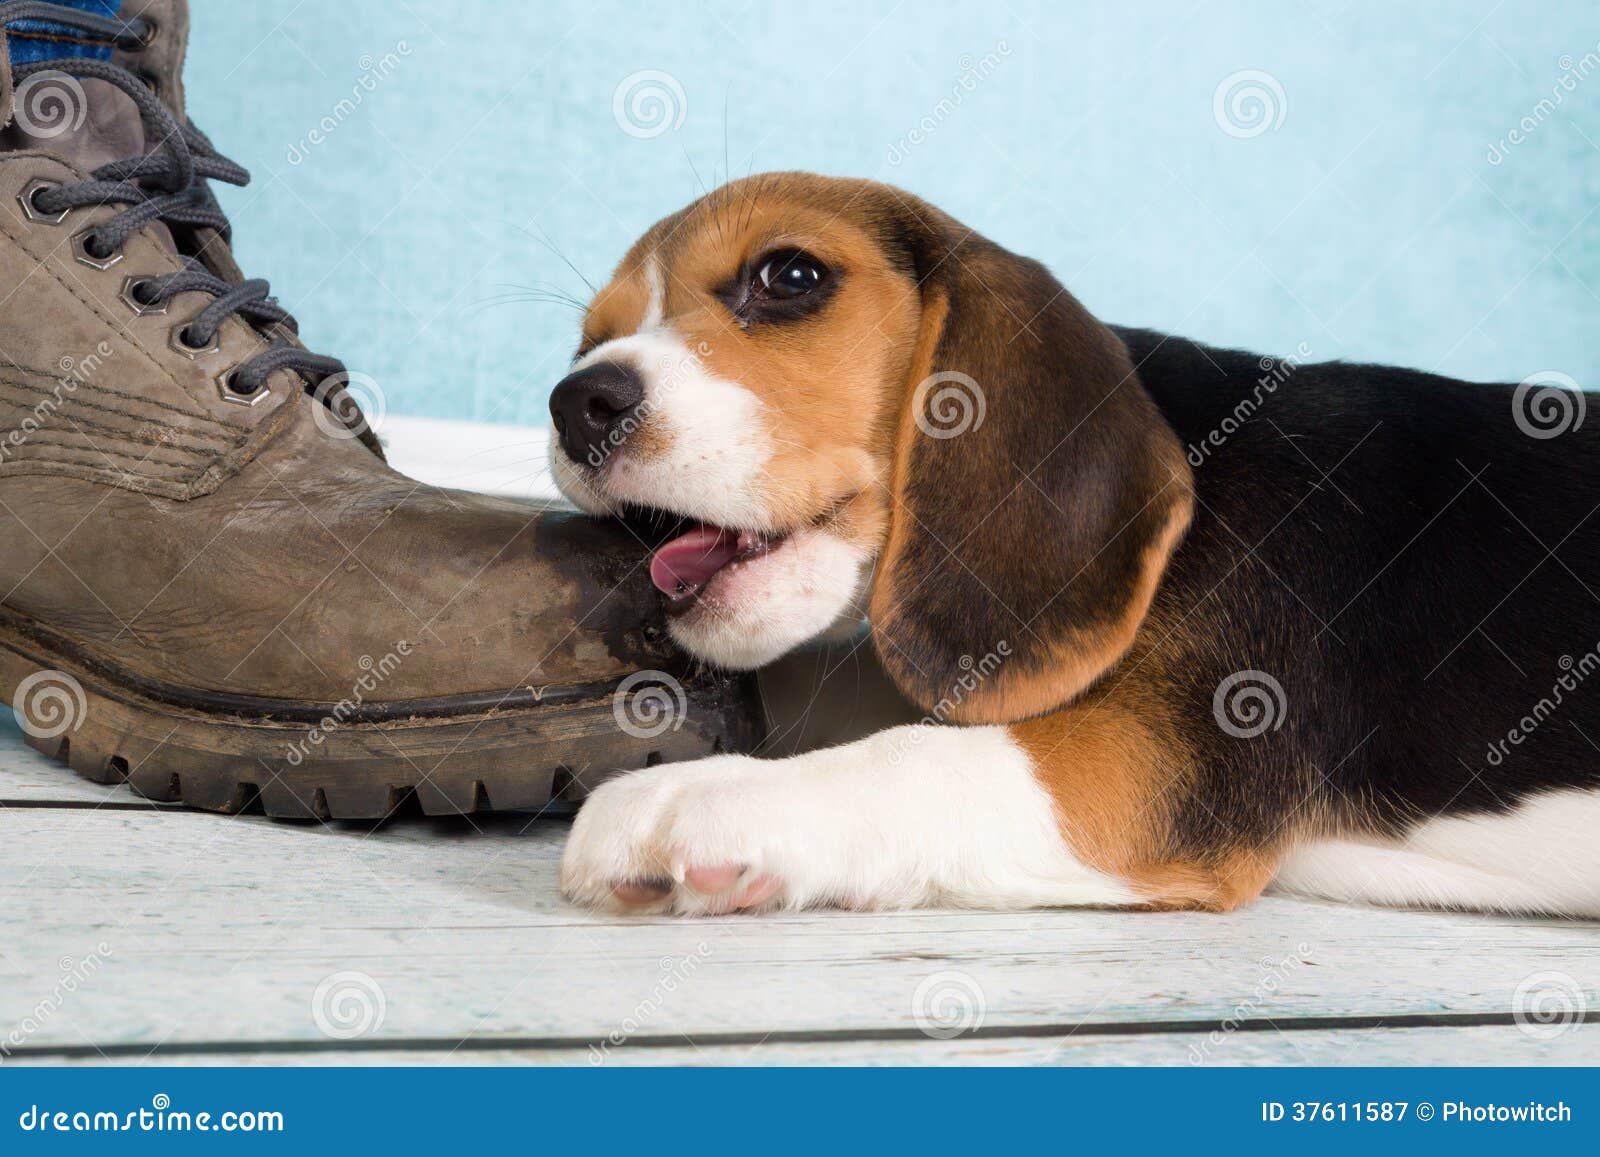 puppy chewing on foot